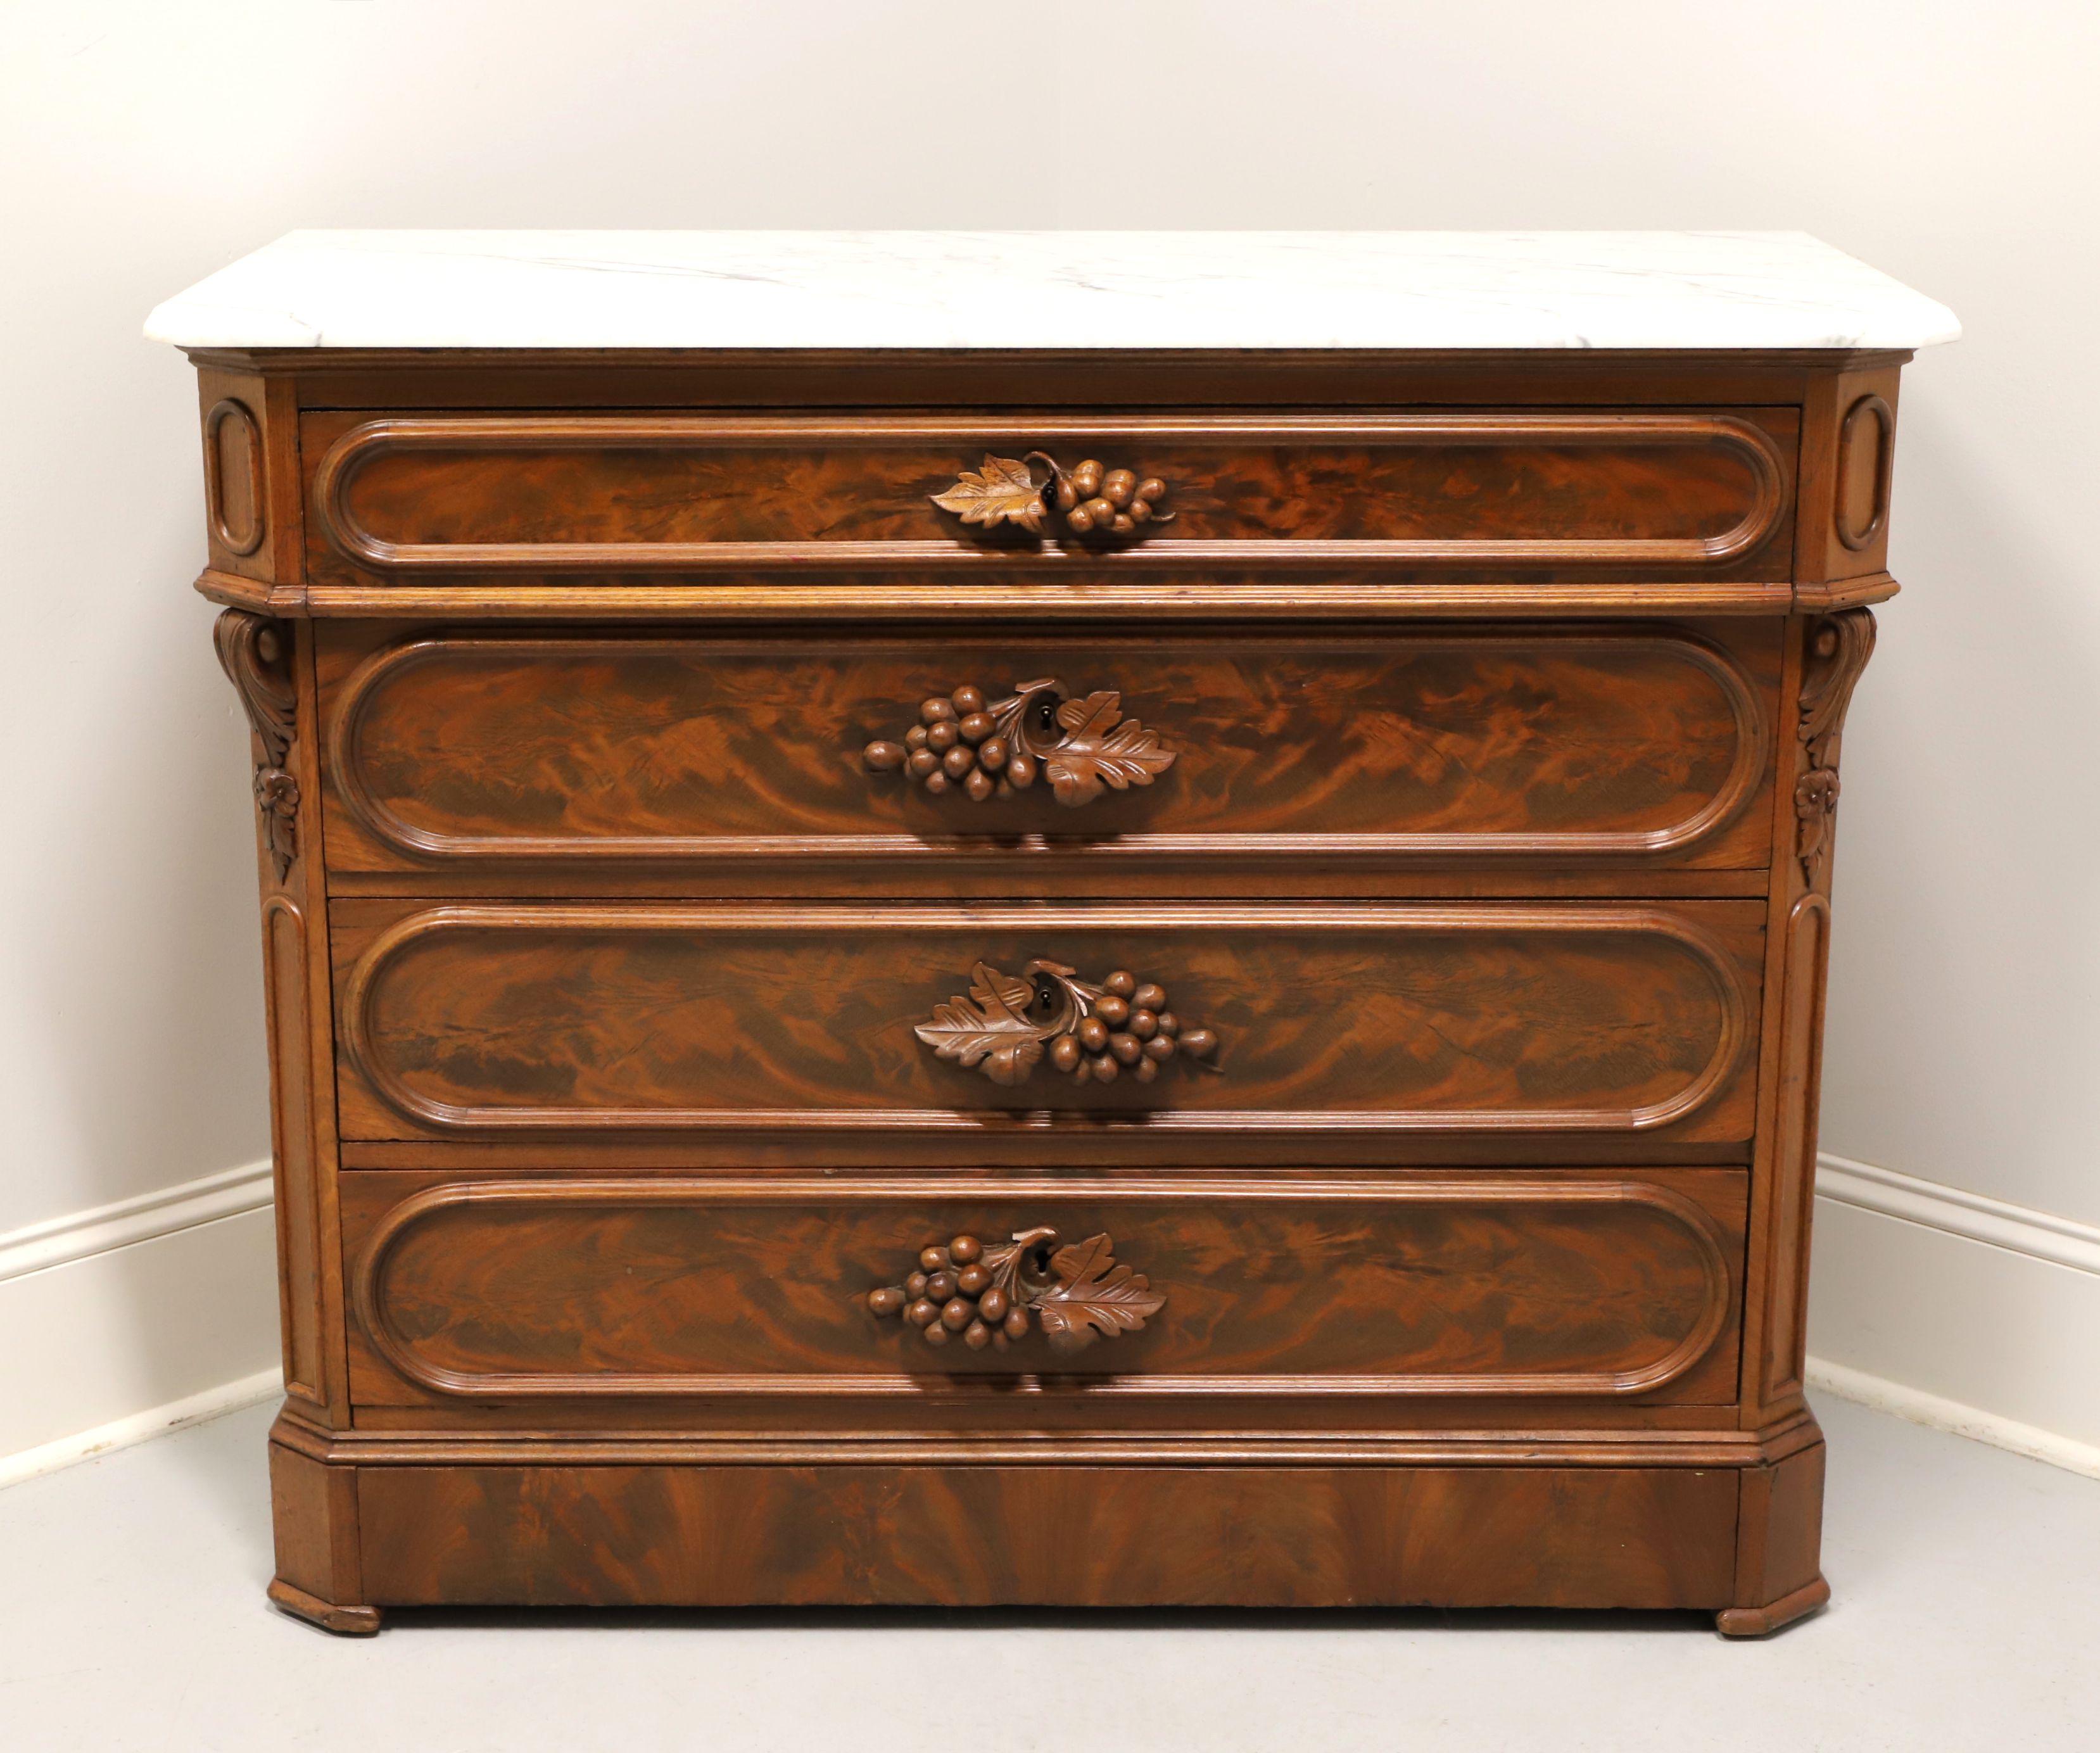 An antique Victorian style marble top four-drawer chest, unbranded. Walnut with burl walnut to drawer fronts, beveled edge marble top, decoratively carved wood handles, carved front corners, solid base and pad feet. Features a smaller upper drawer